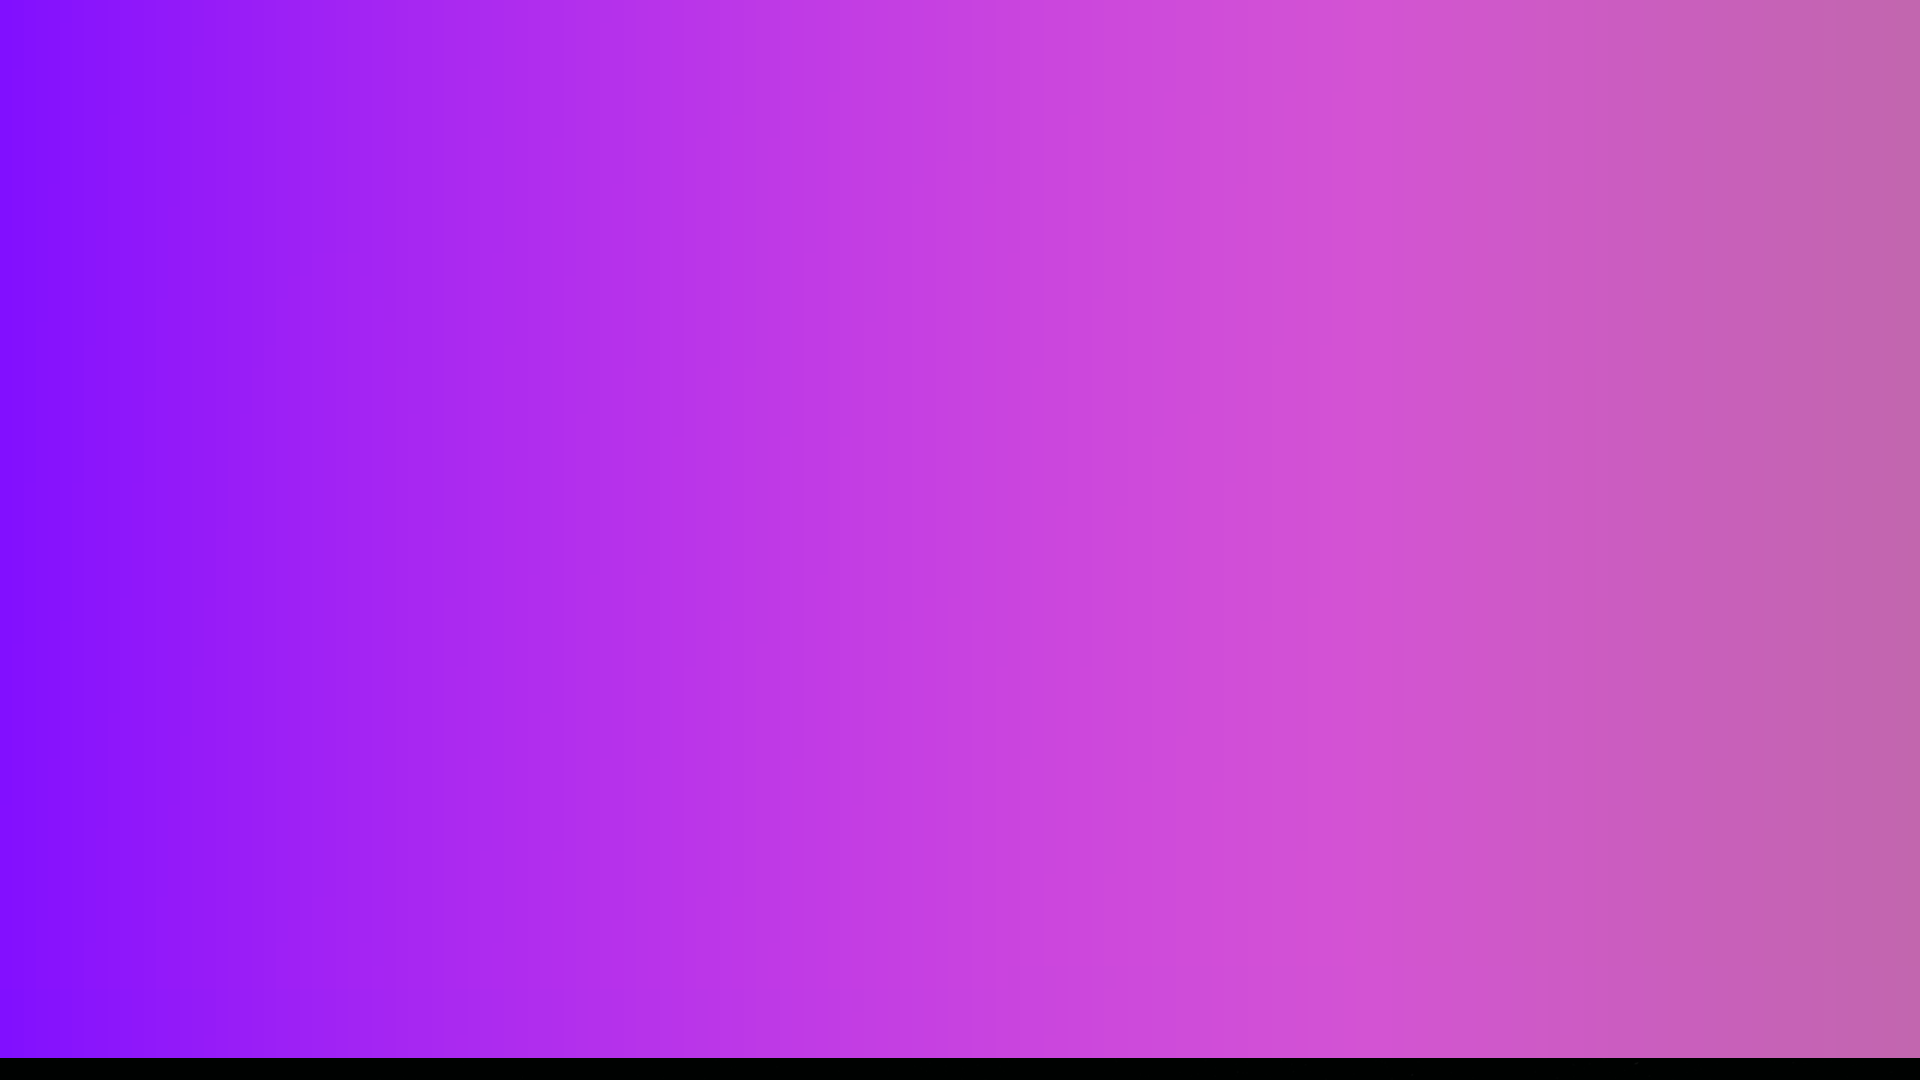 User Entered Colors